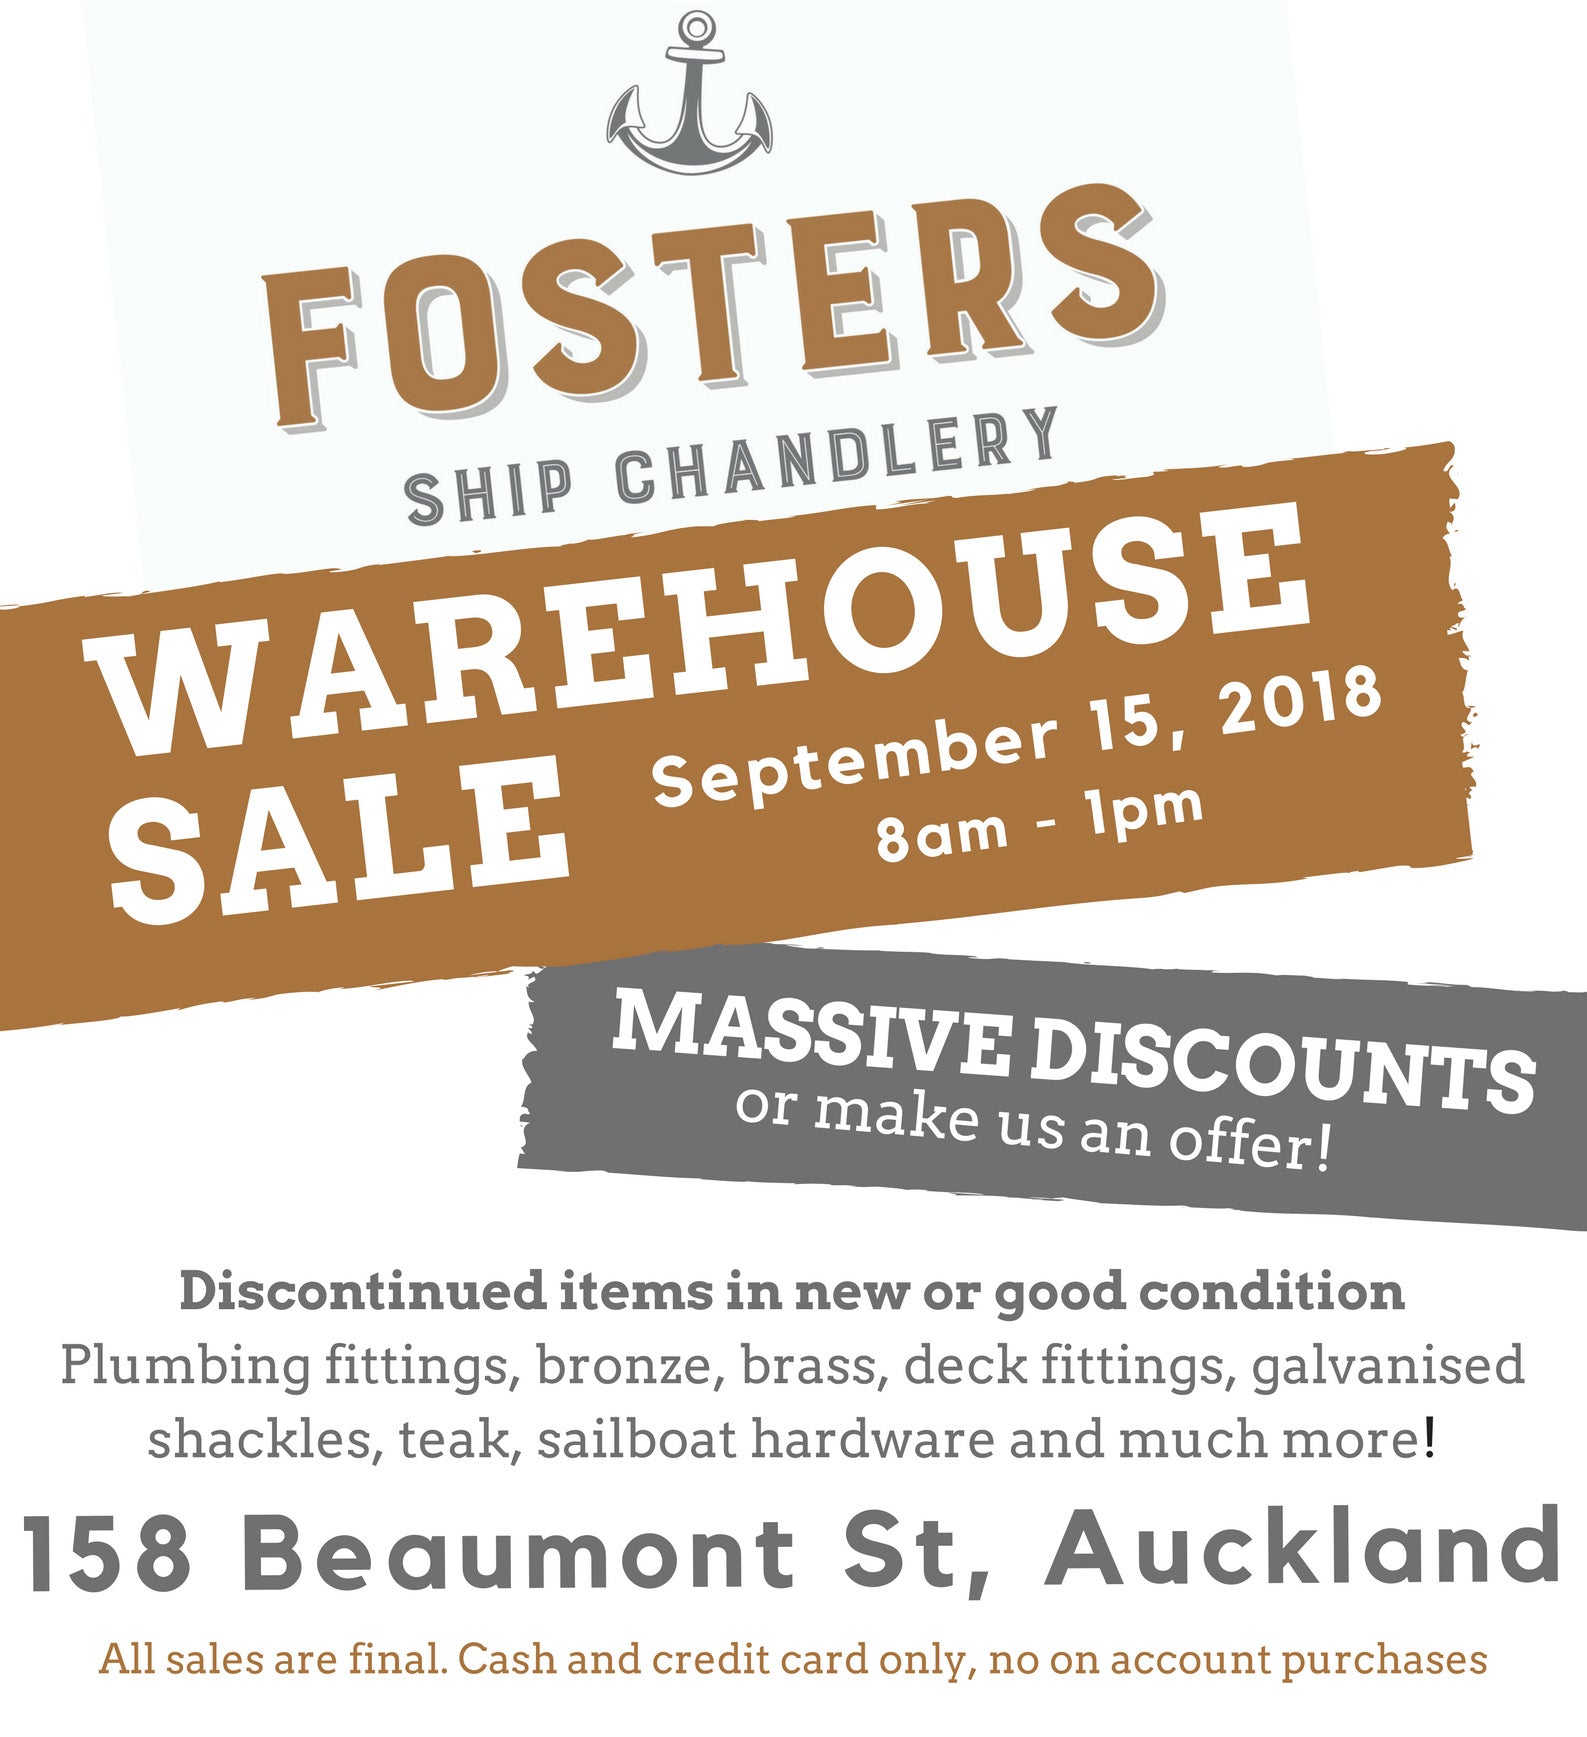 Fosters Ship Chandlery Warehouse Sale Ad